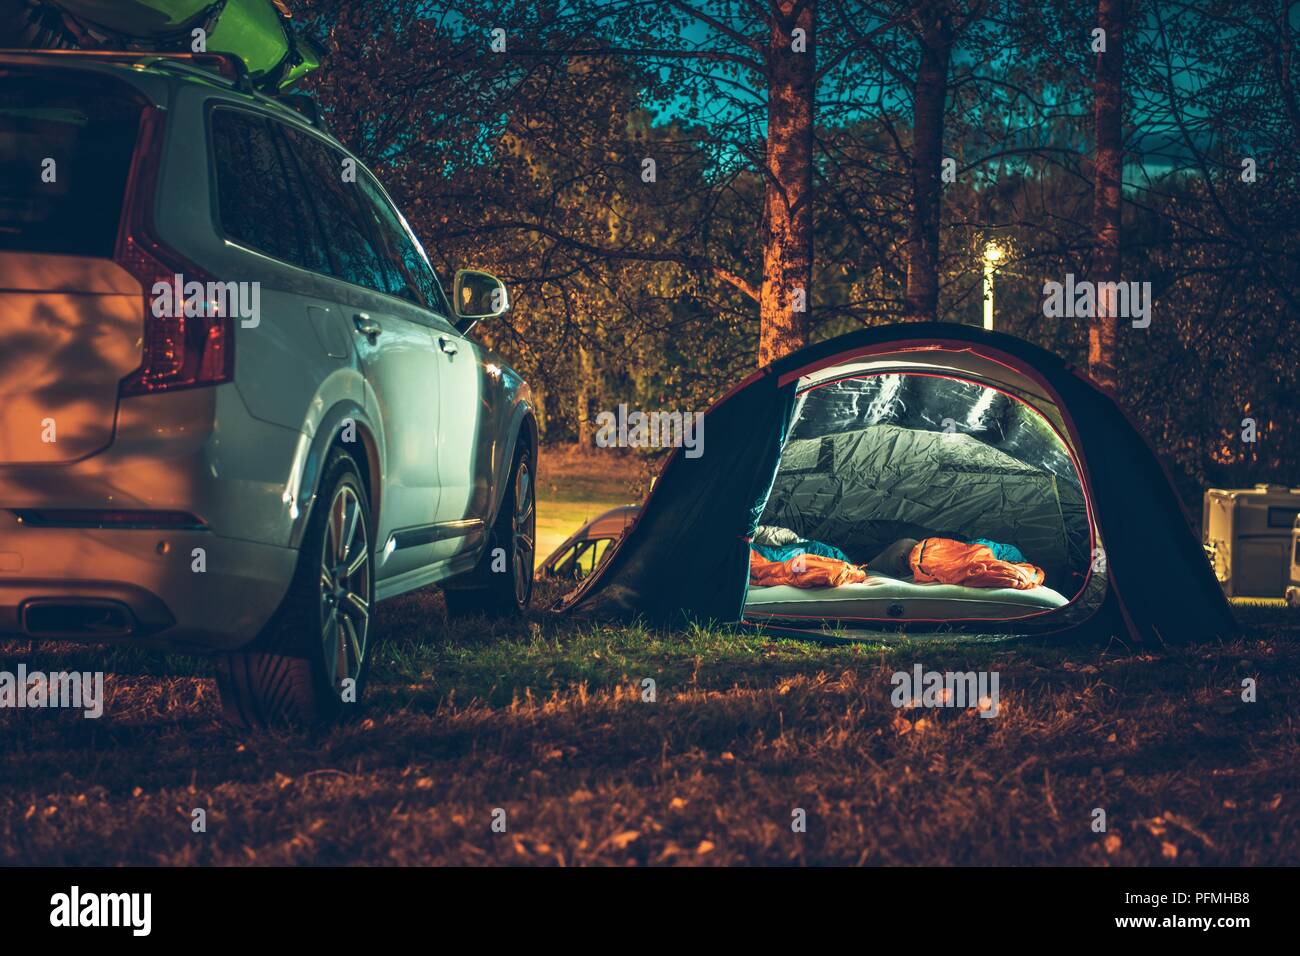 Tent Camping in the Forest. Traveling by Car and Camping with a Tent. Summer Travel Theme. Stock Photo